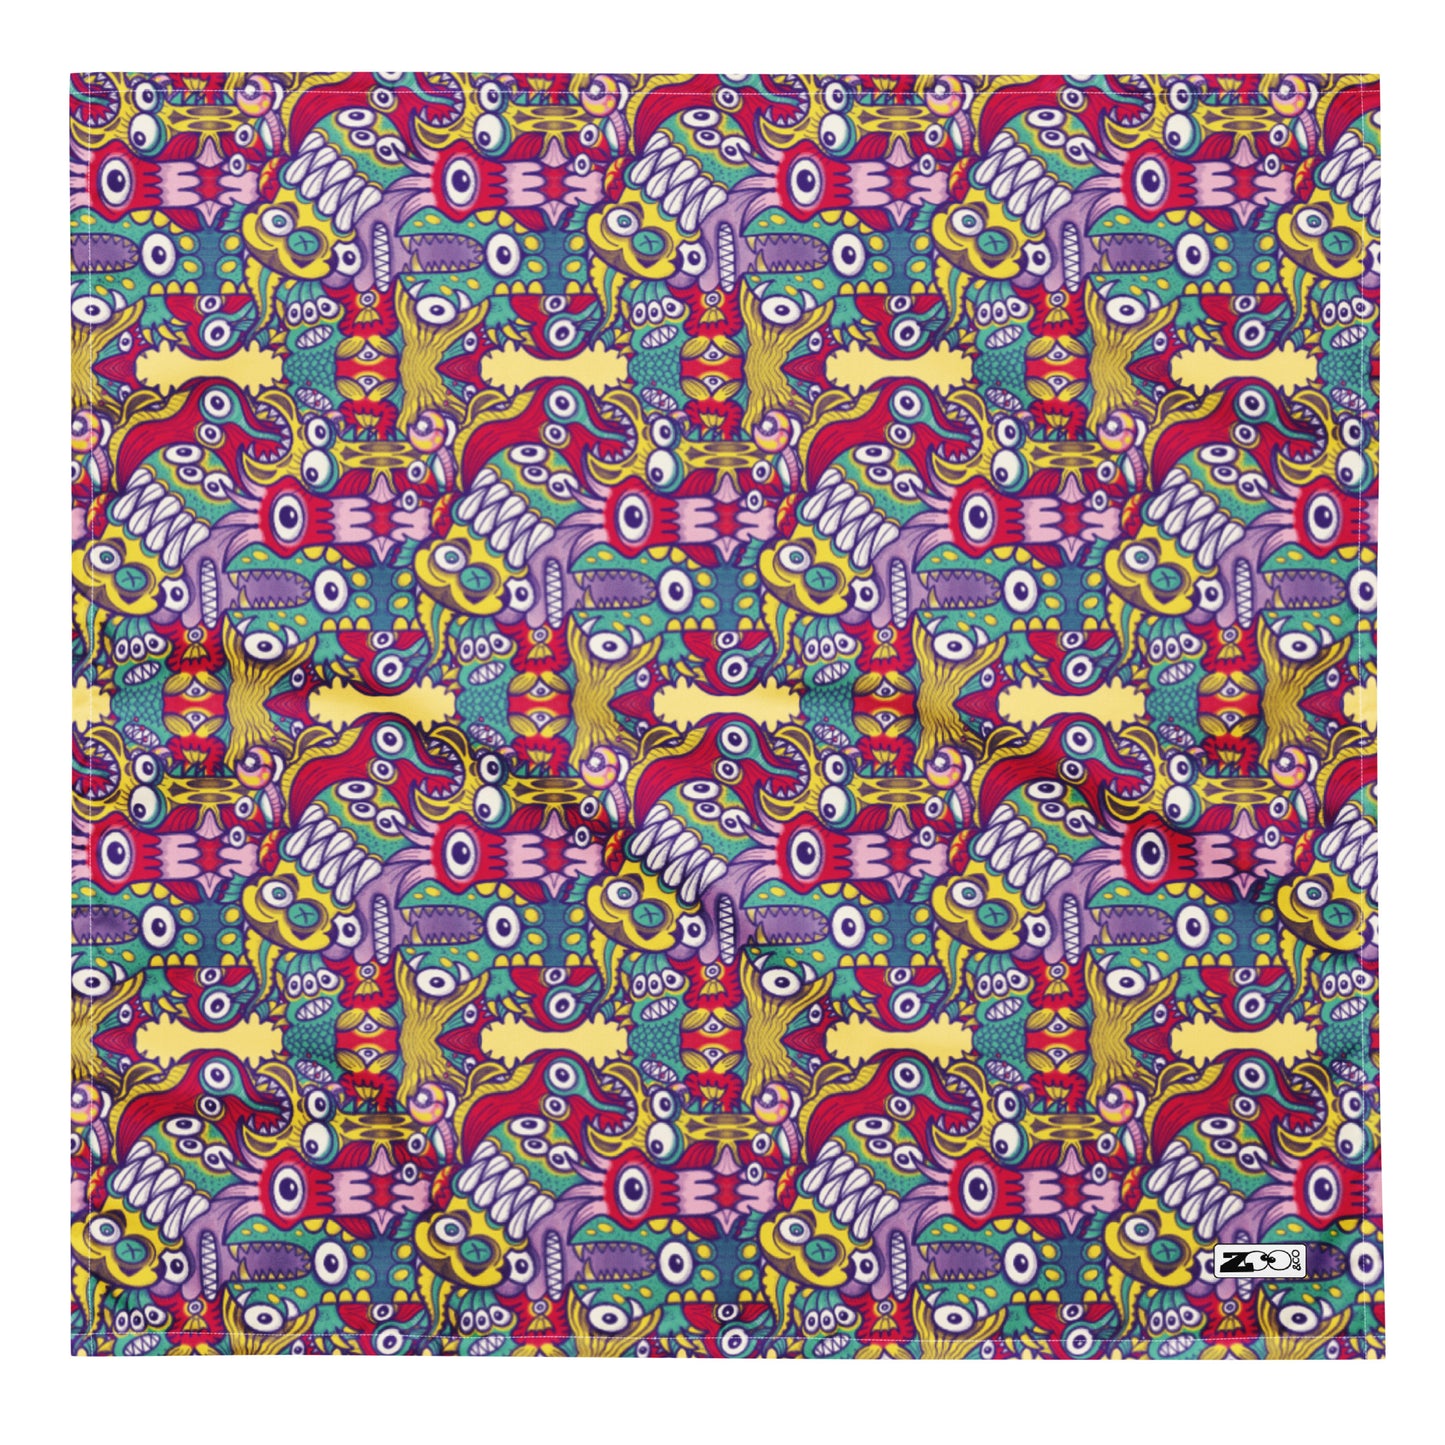 Exquisite corpse of doodles in a pattern design All-over print bandana. Large size